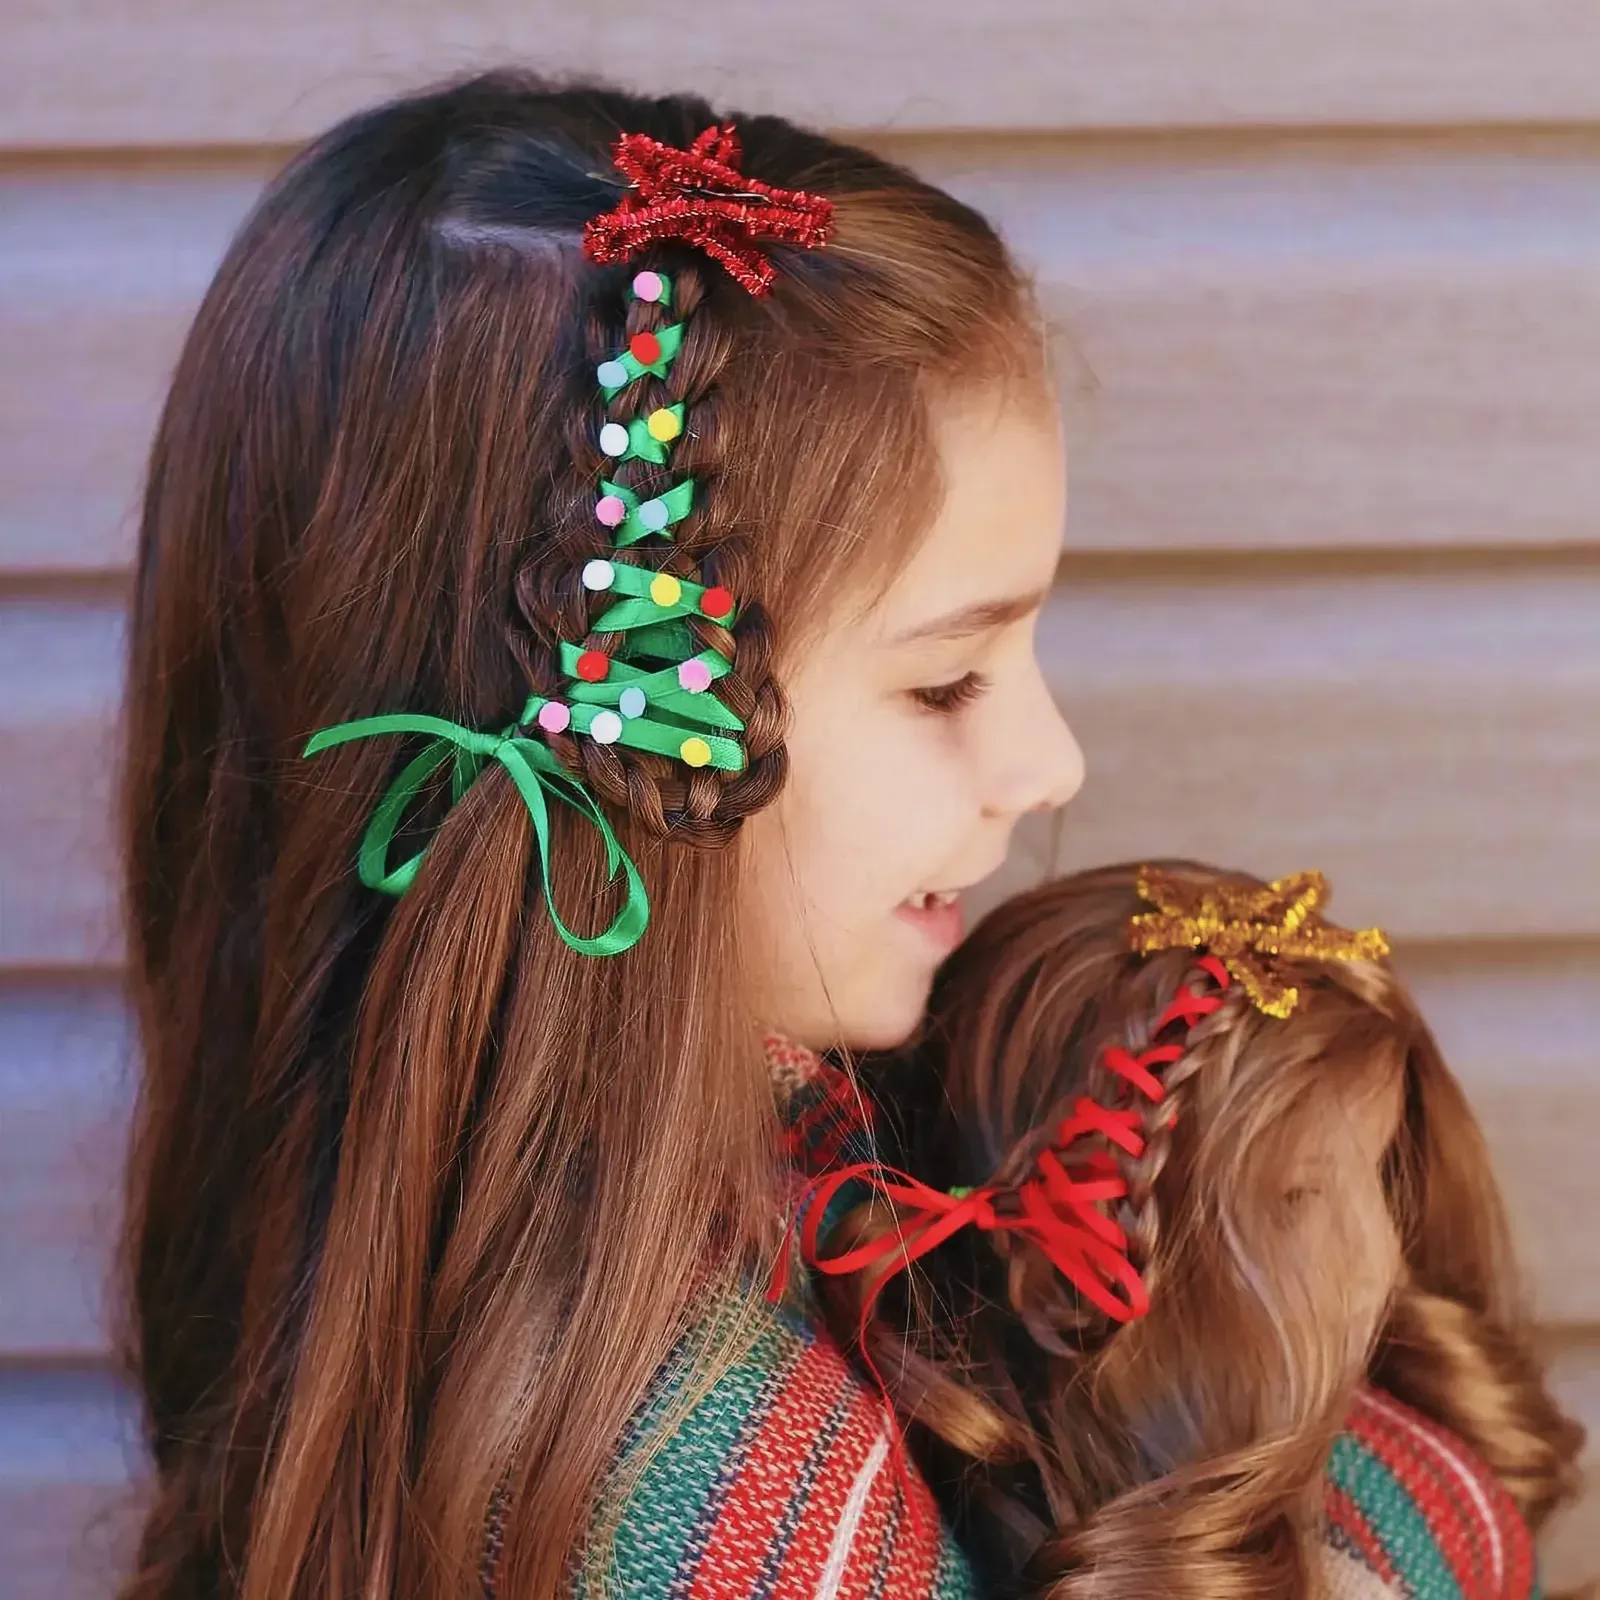 Young girl with festive Christmas braided hair